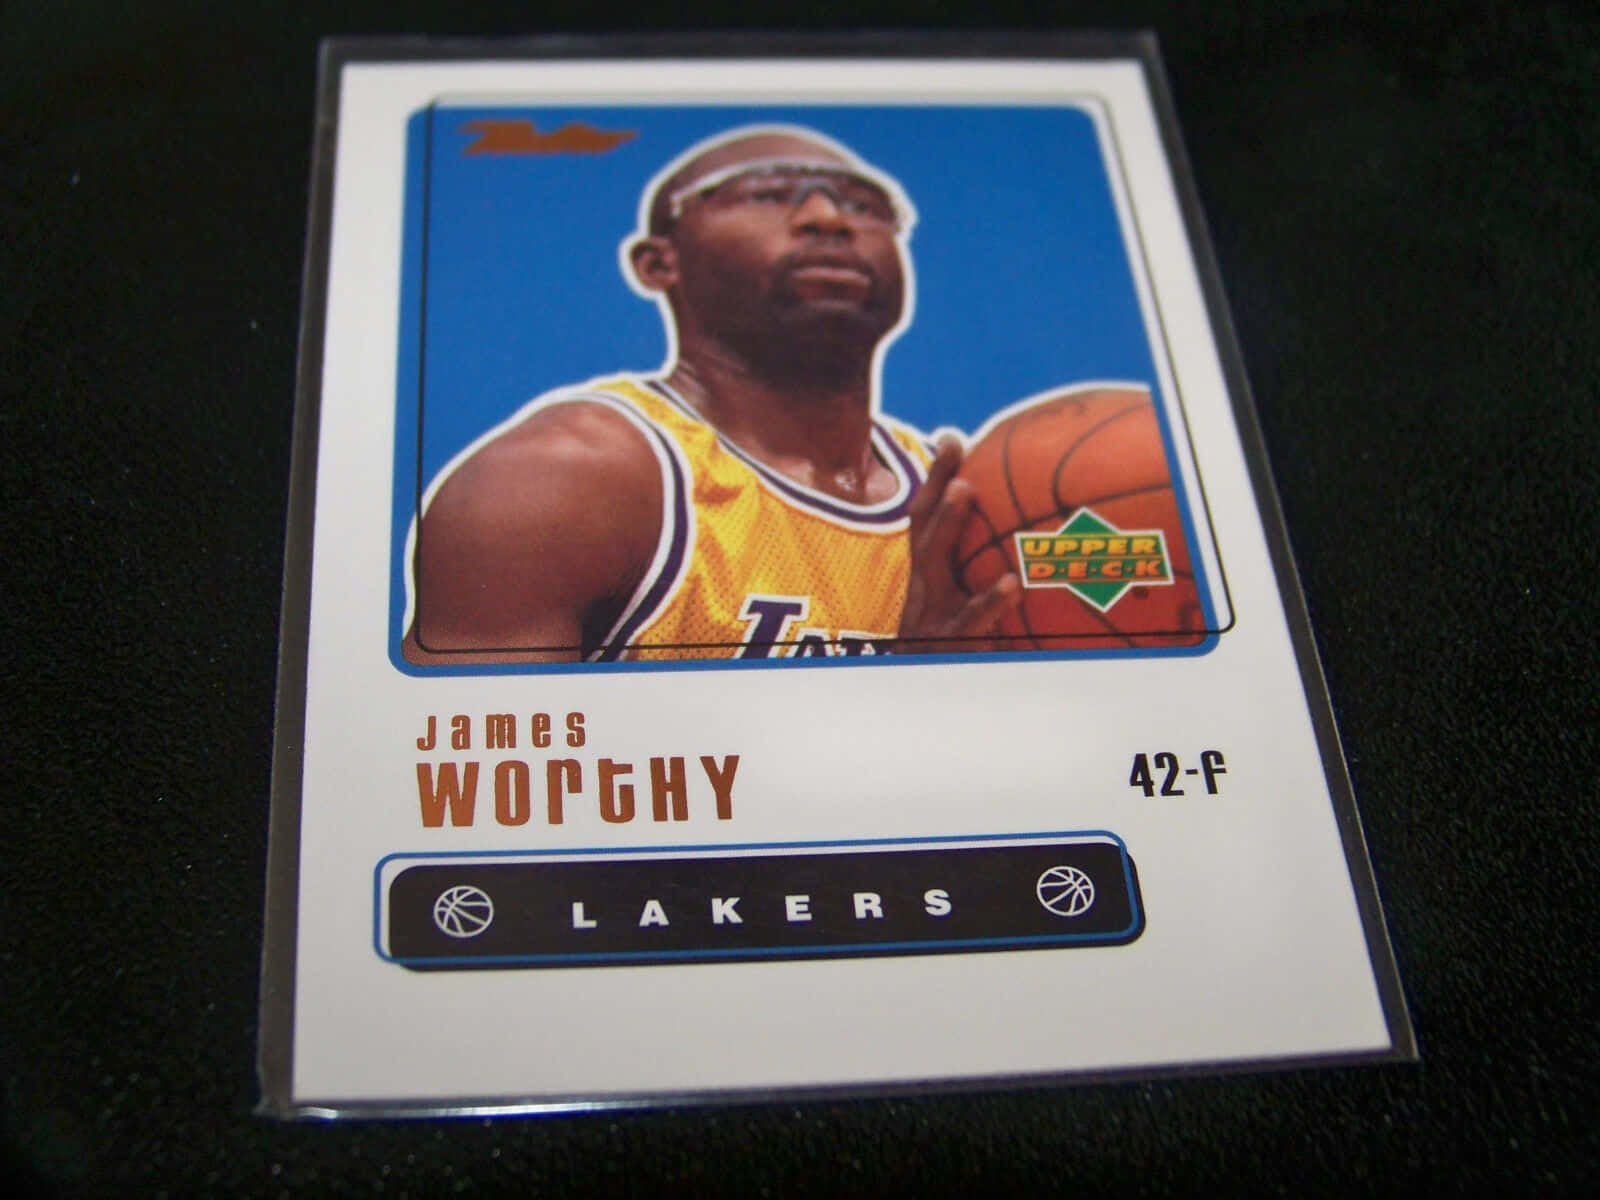 Jamesworthy Nba Lakers Photo Card Would Be Translated As 